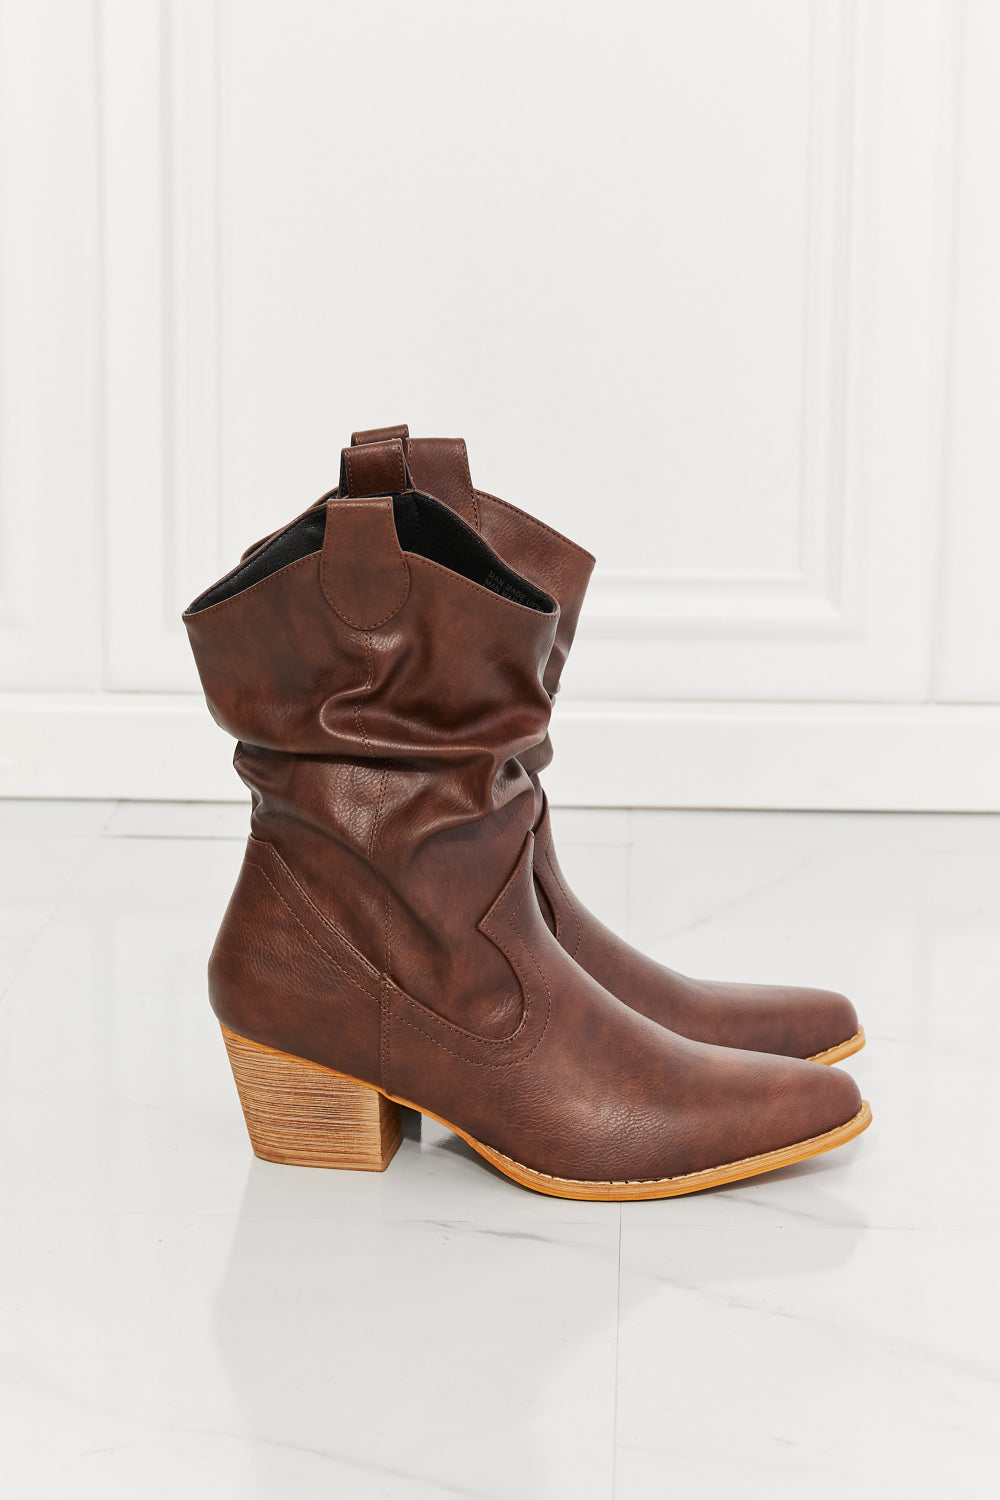 MMShoes Scrunch Cowboy Cowgirl Bootie Ankle Boots Pointy Toe in Brown Better in Texas